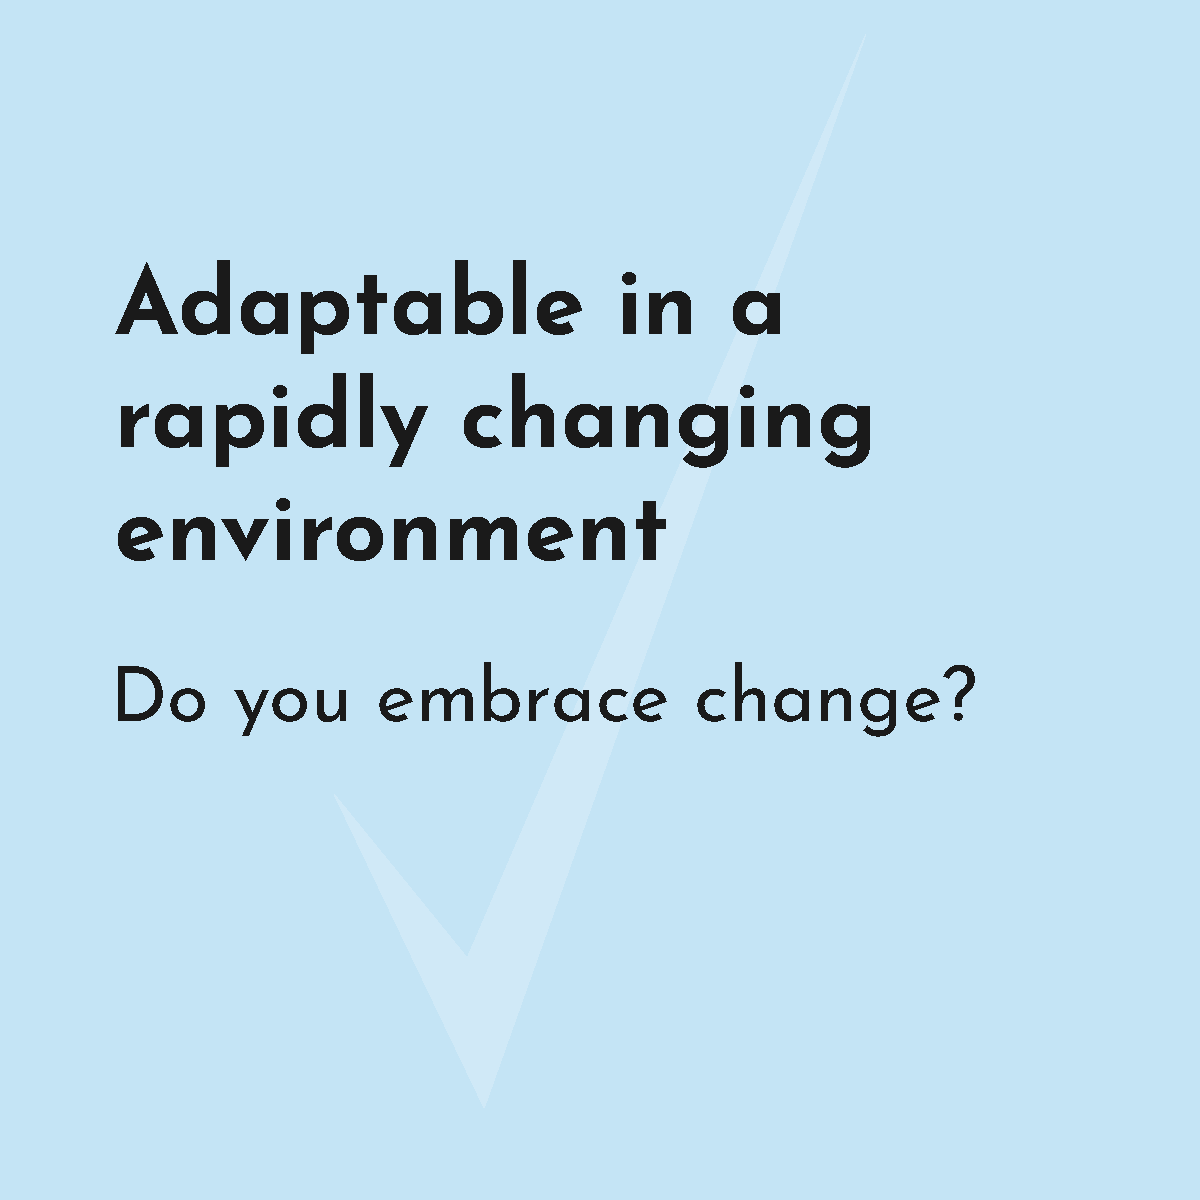 adaptable in a rapidly changing envrionment